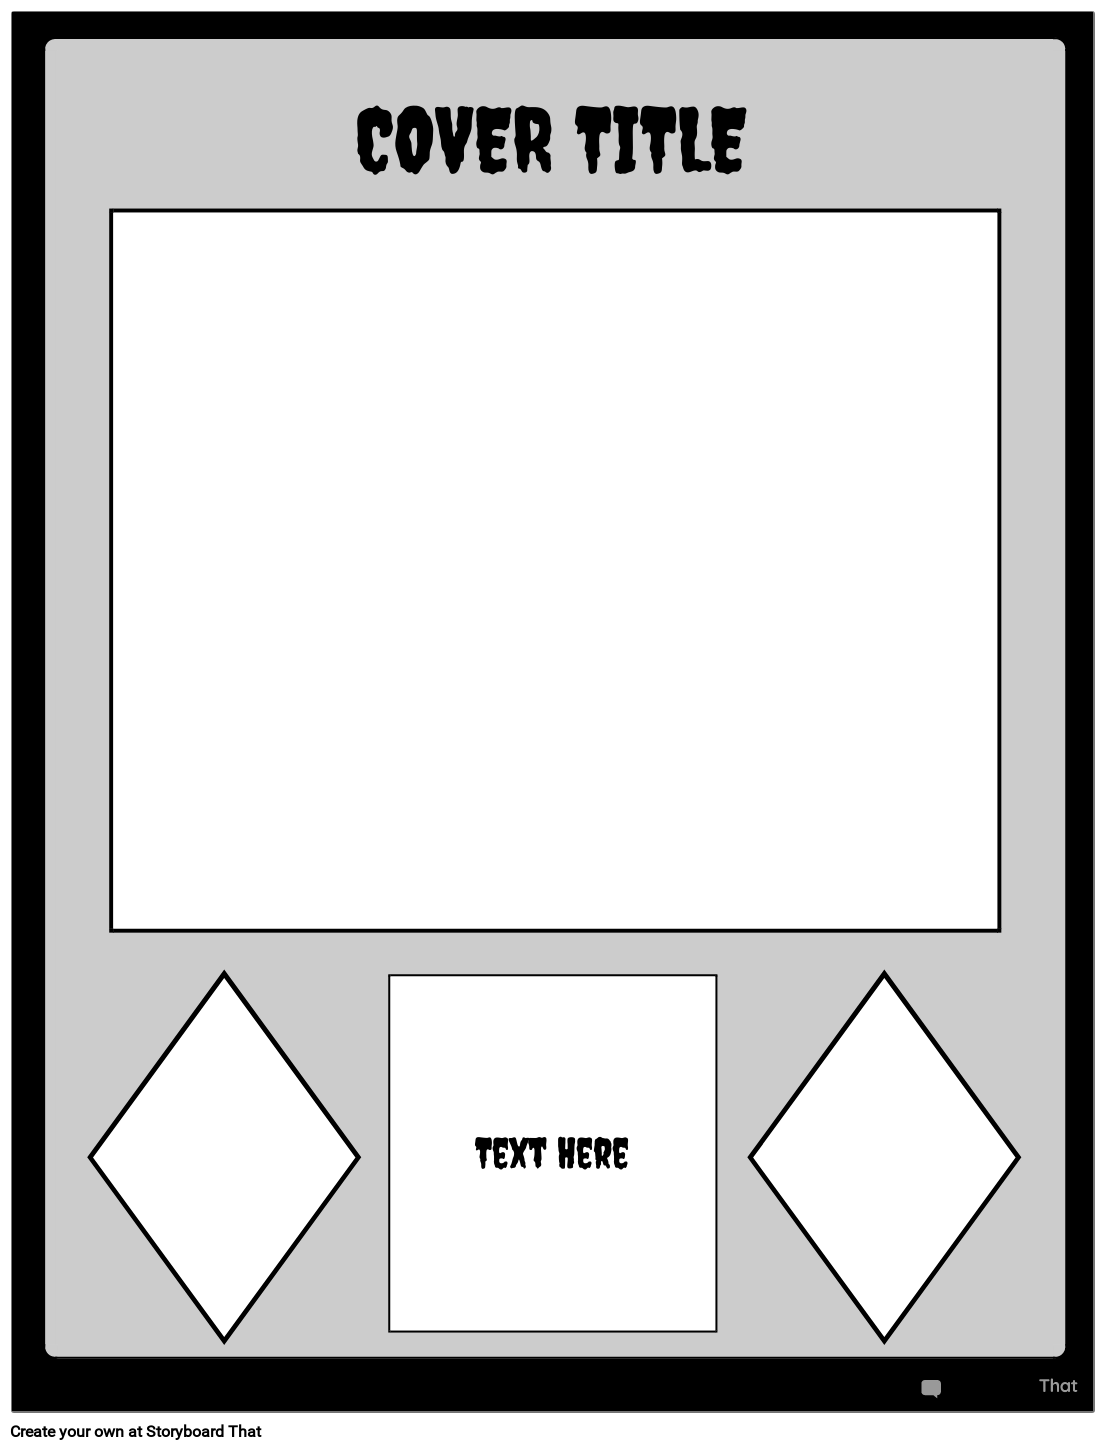 Book Cover Worksheet Featuring Diamonds